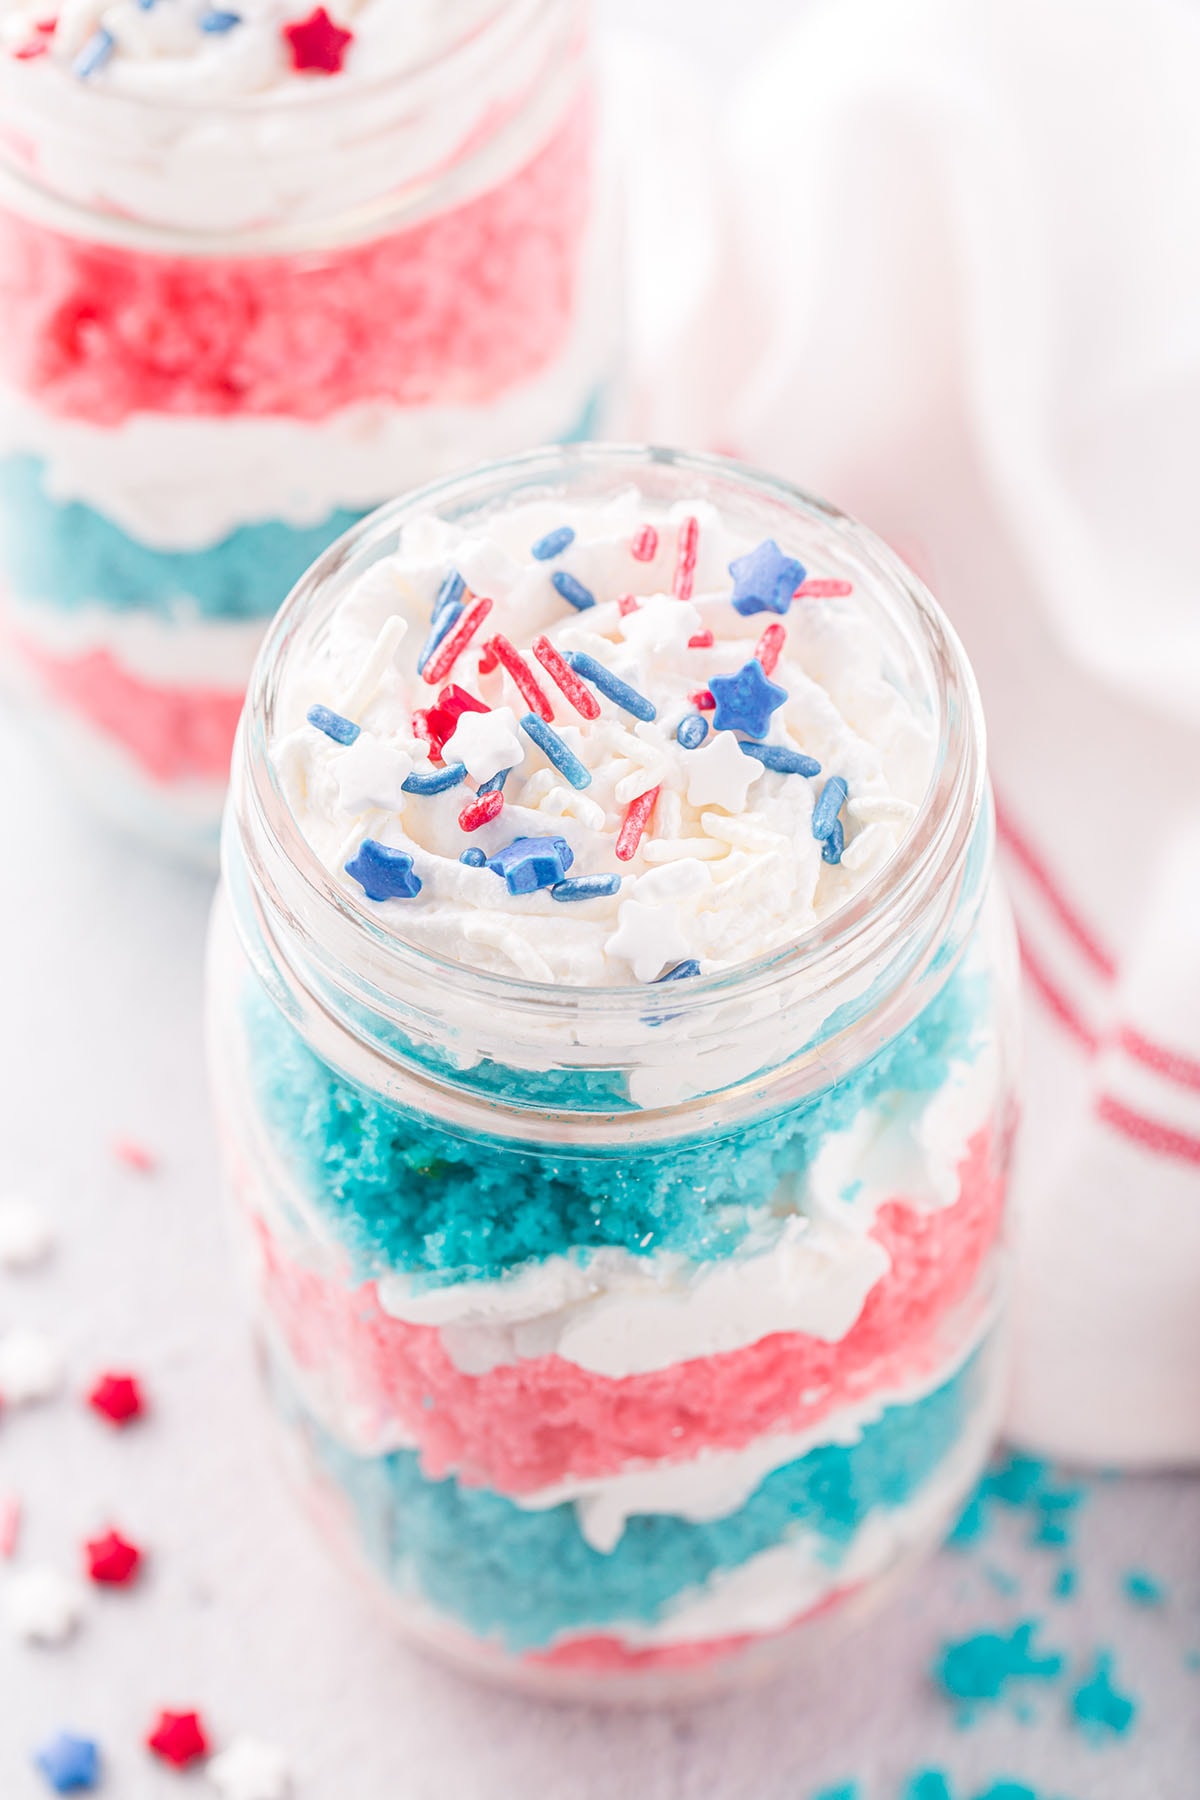 Fourth of July Cake in a Jar hero image